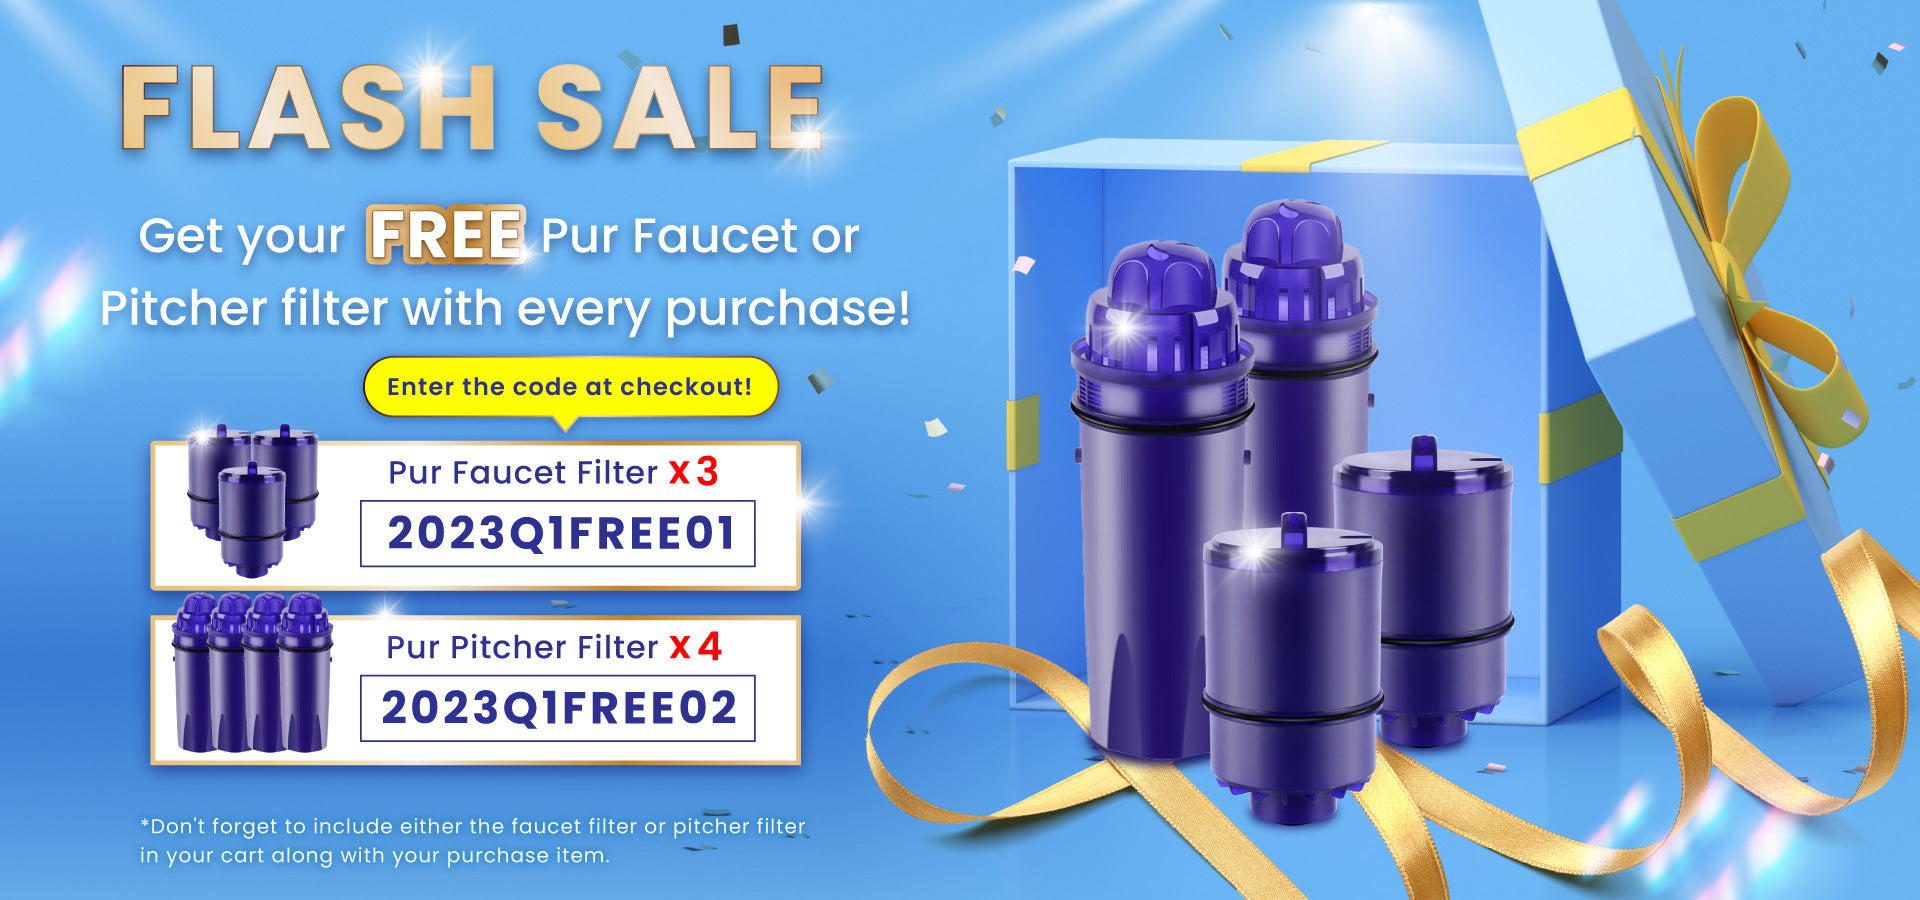 Free Pur faucet filter RF9999 or free Pur pitcher filter CRF950Z General Water Solution giveaway